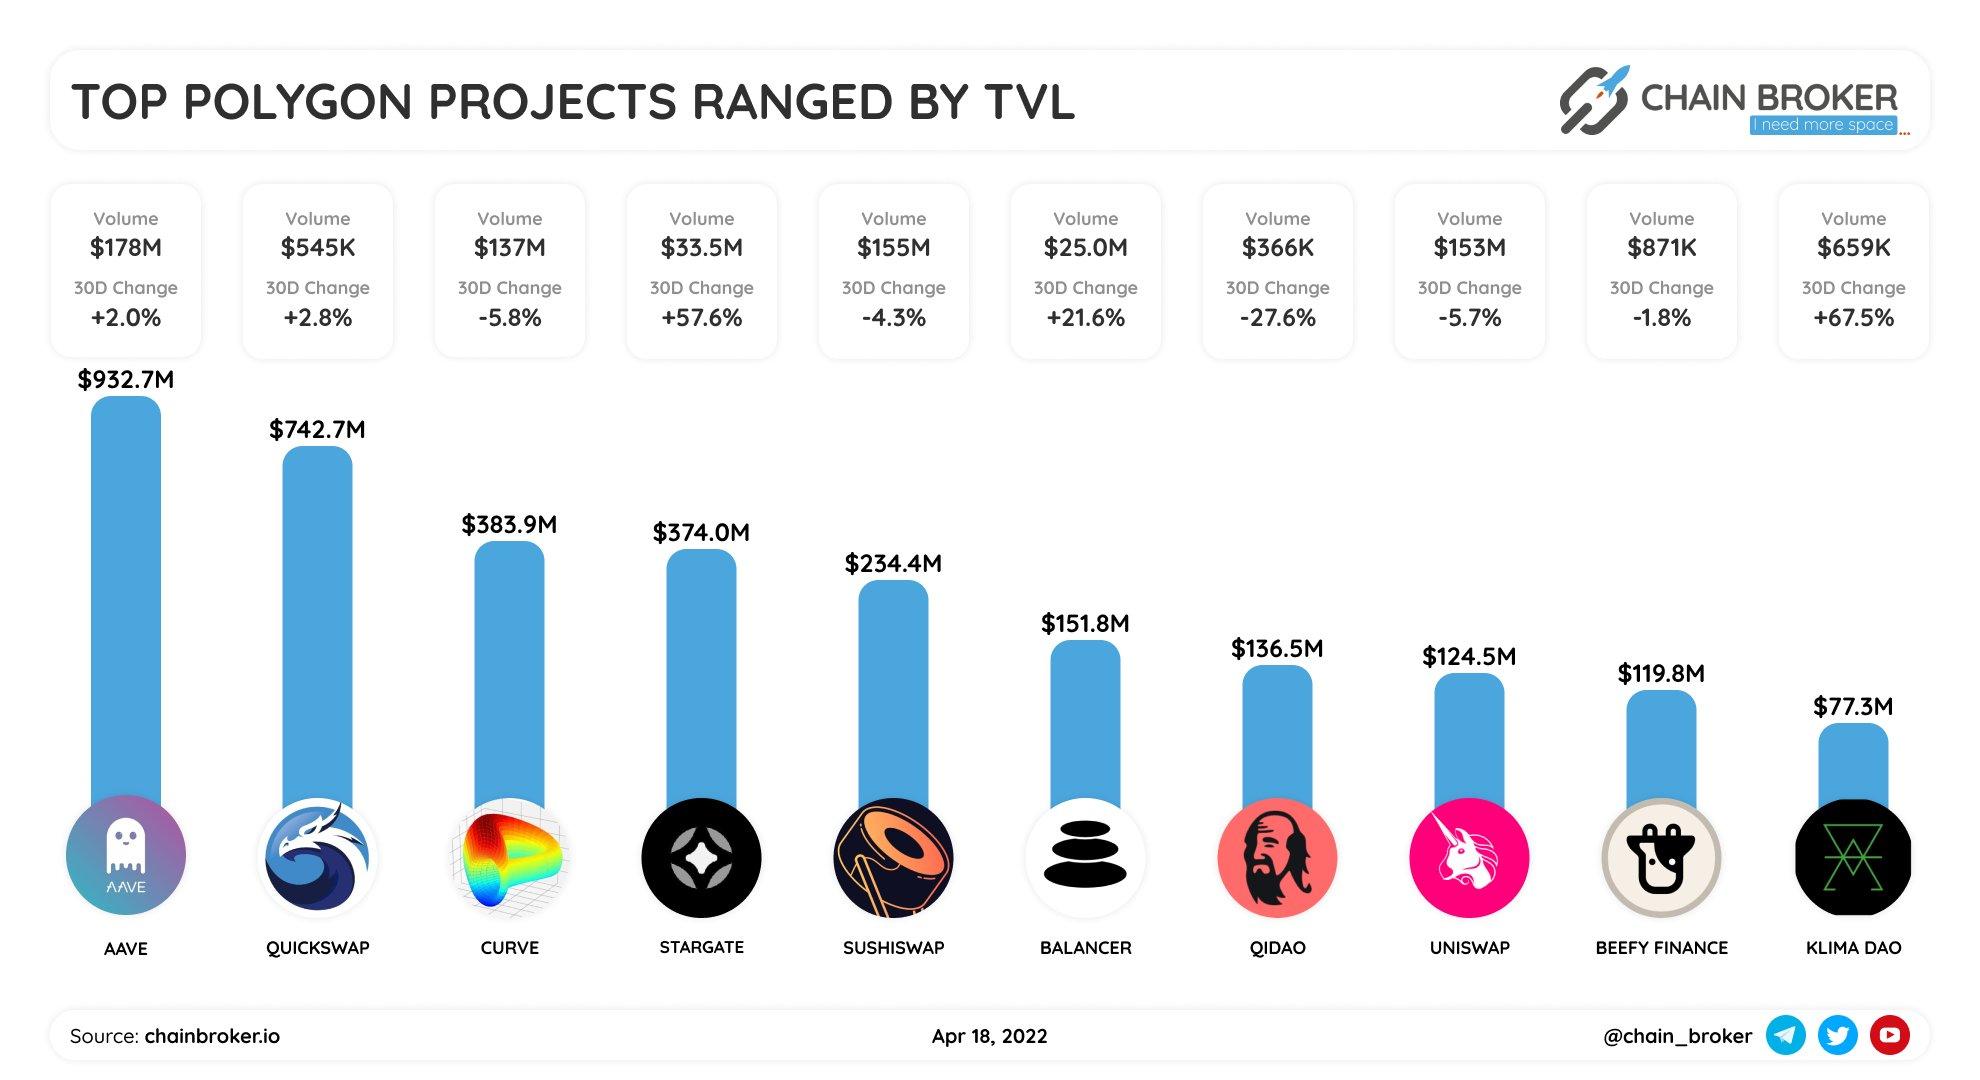 Top polygon projects ranged by TVL